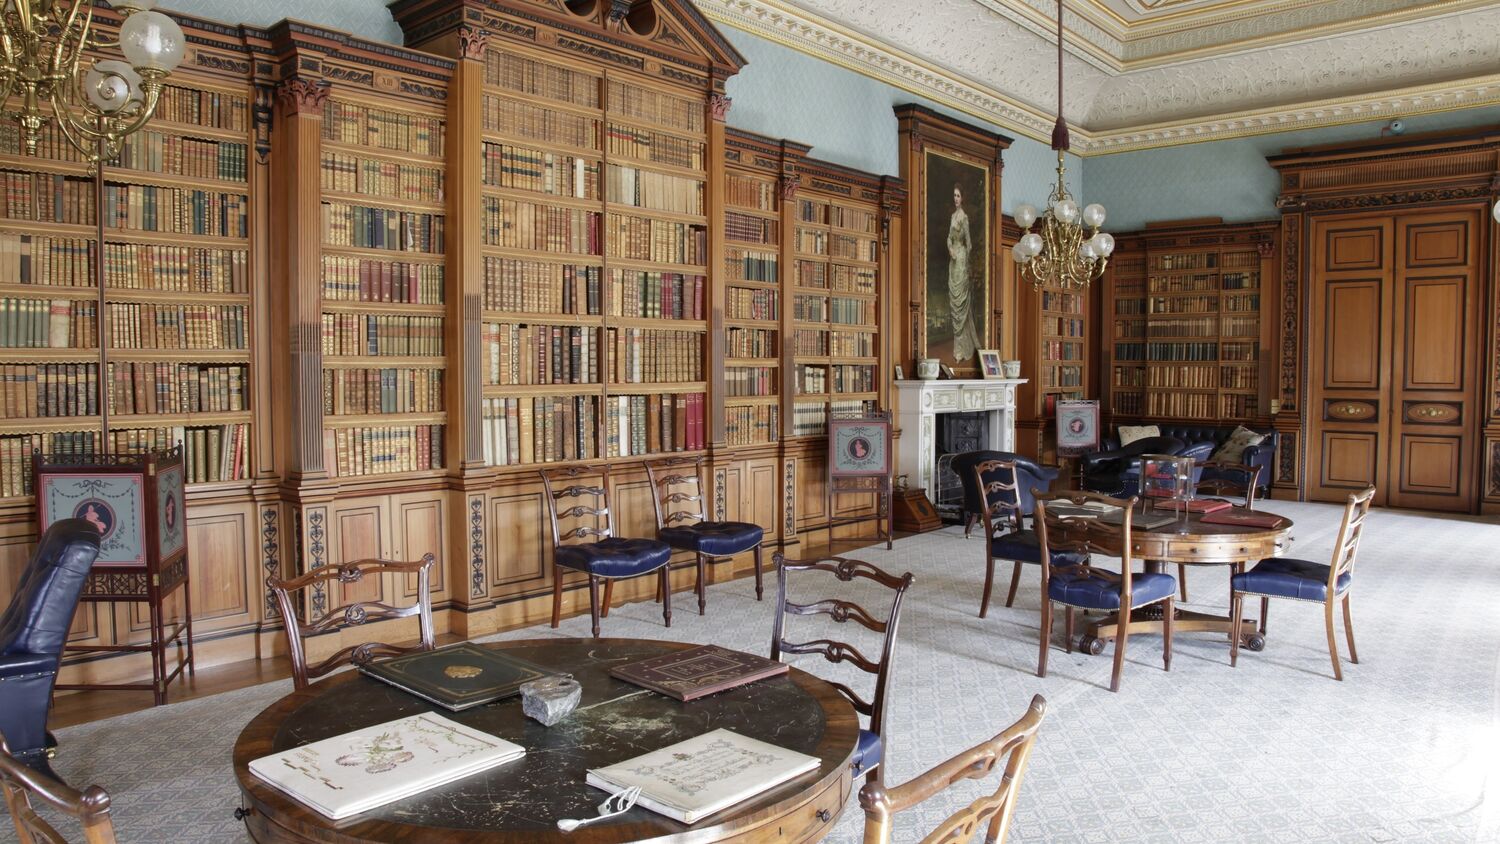 The library at Haddo House, a large and light room with bookshelves from the floor to the ceiling along the walls, low hanging chandeliers, and tables and chairs. There is a portrait of a woman in a long dress hung above a fireplace.